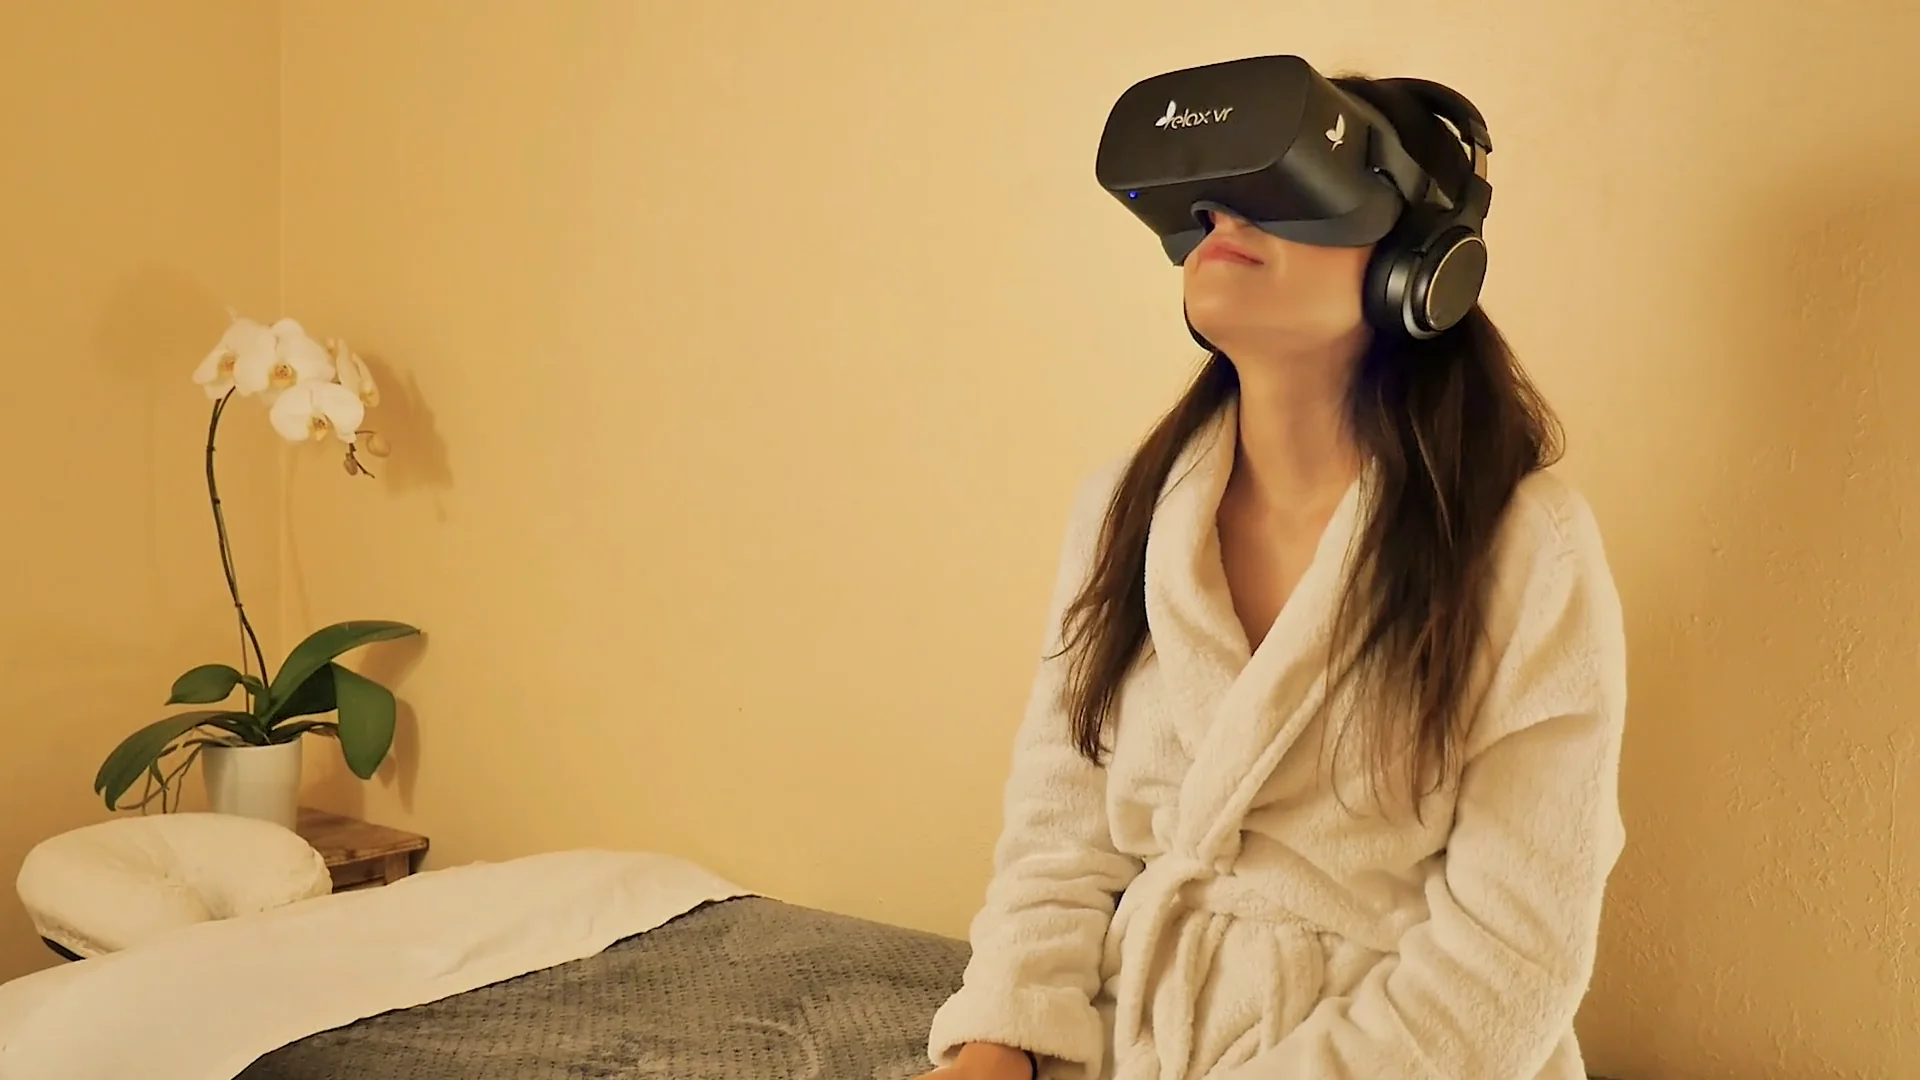 most relaxing vr games